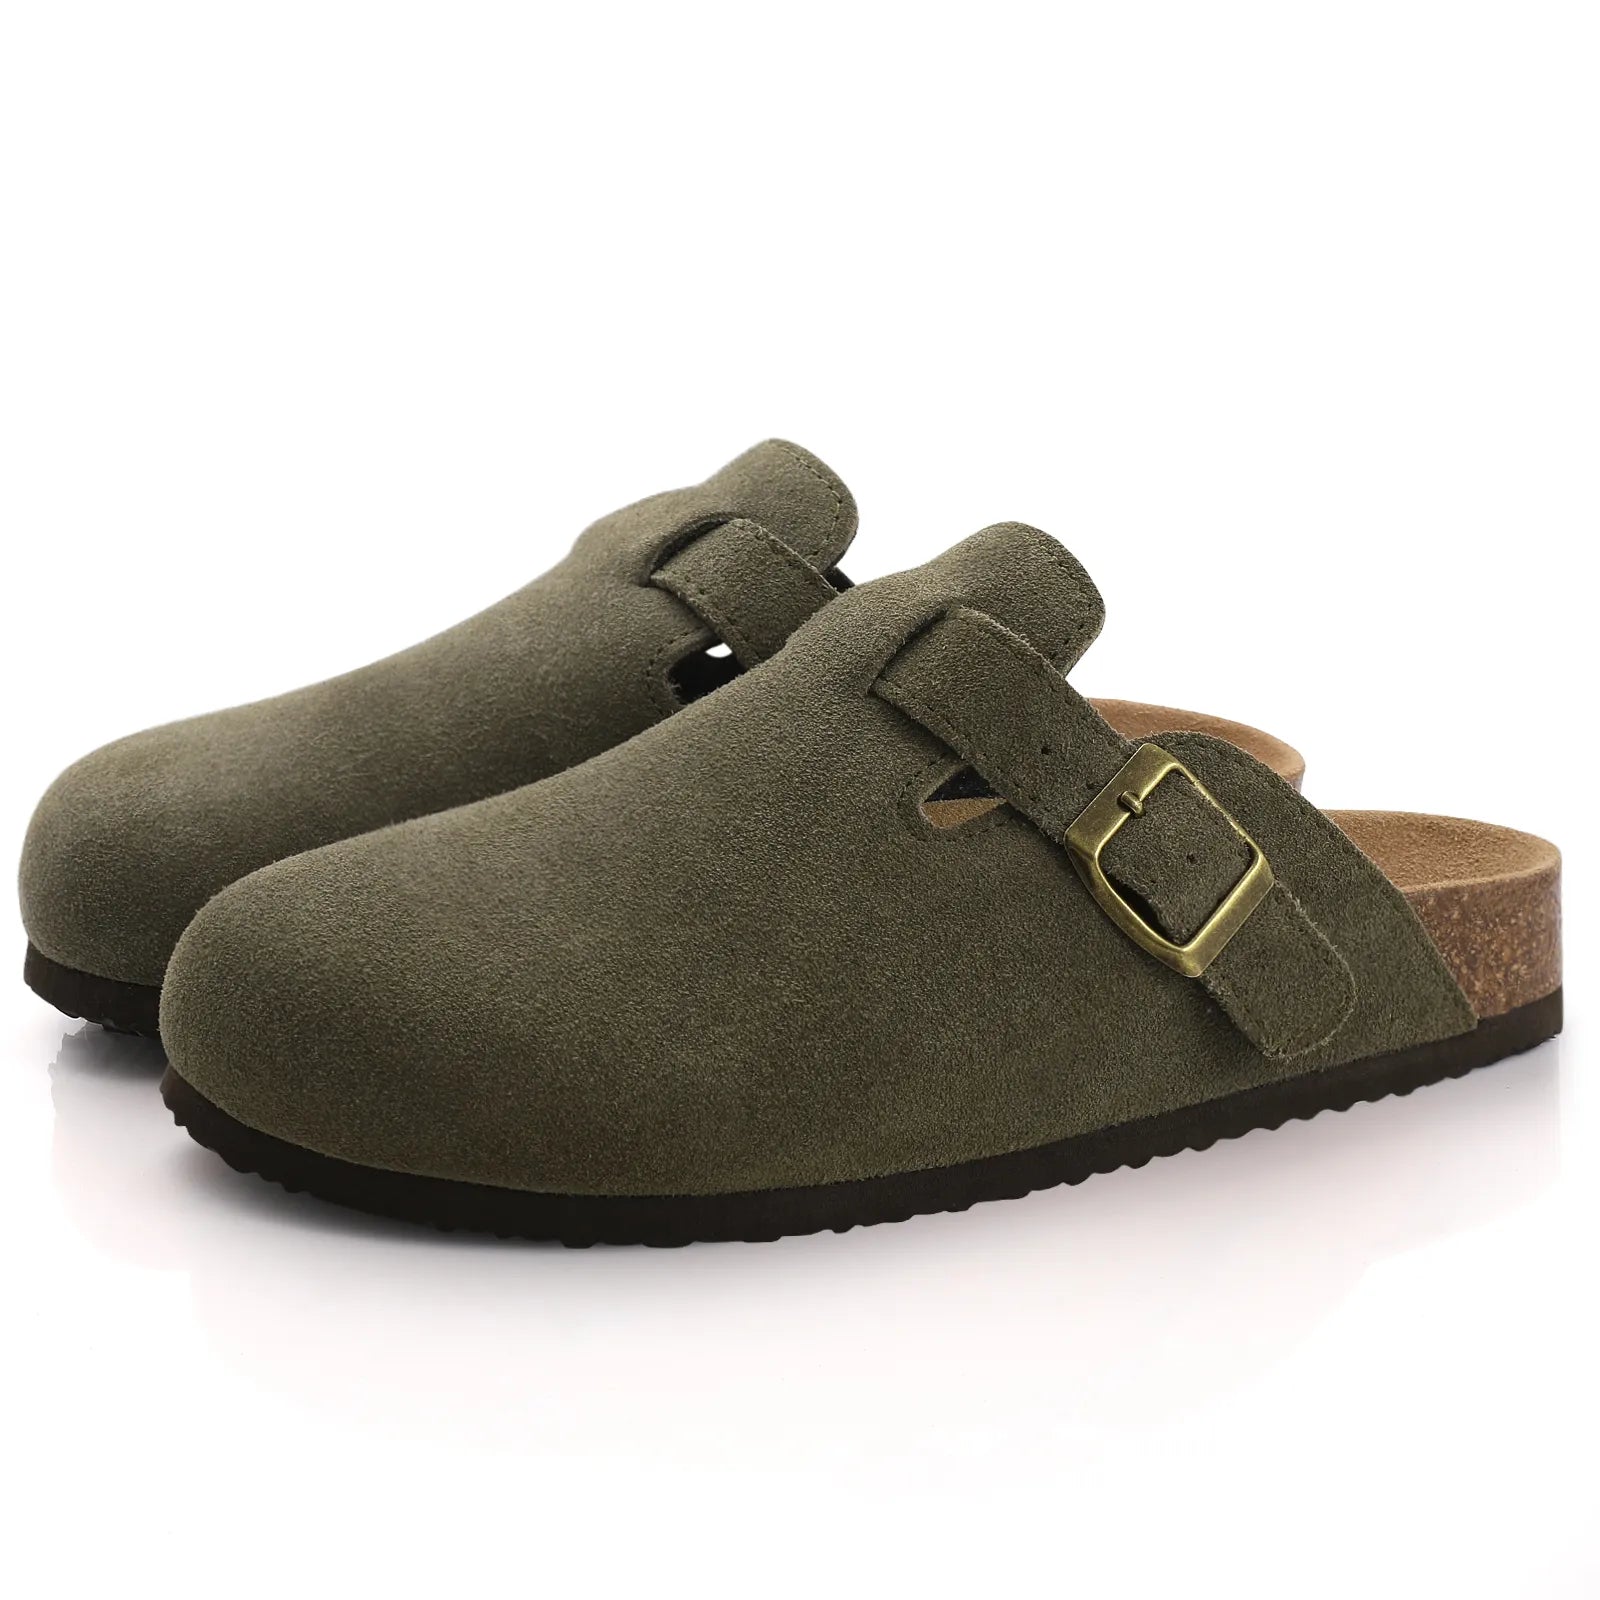 Fashion Women's Suede Mules Slippers Men Clogs Cork Insole Sandals With Arch Support Outdoor Beach Slides Home Shoes voguable